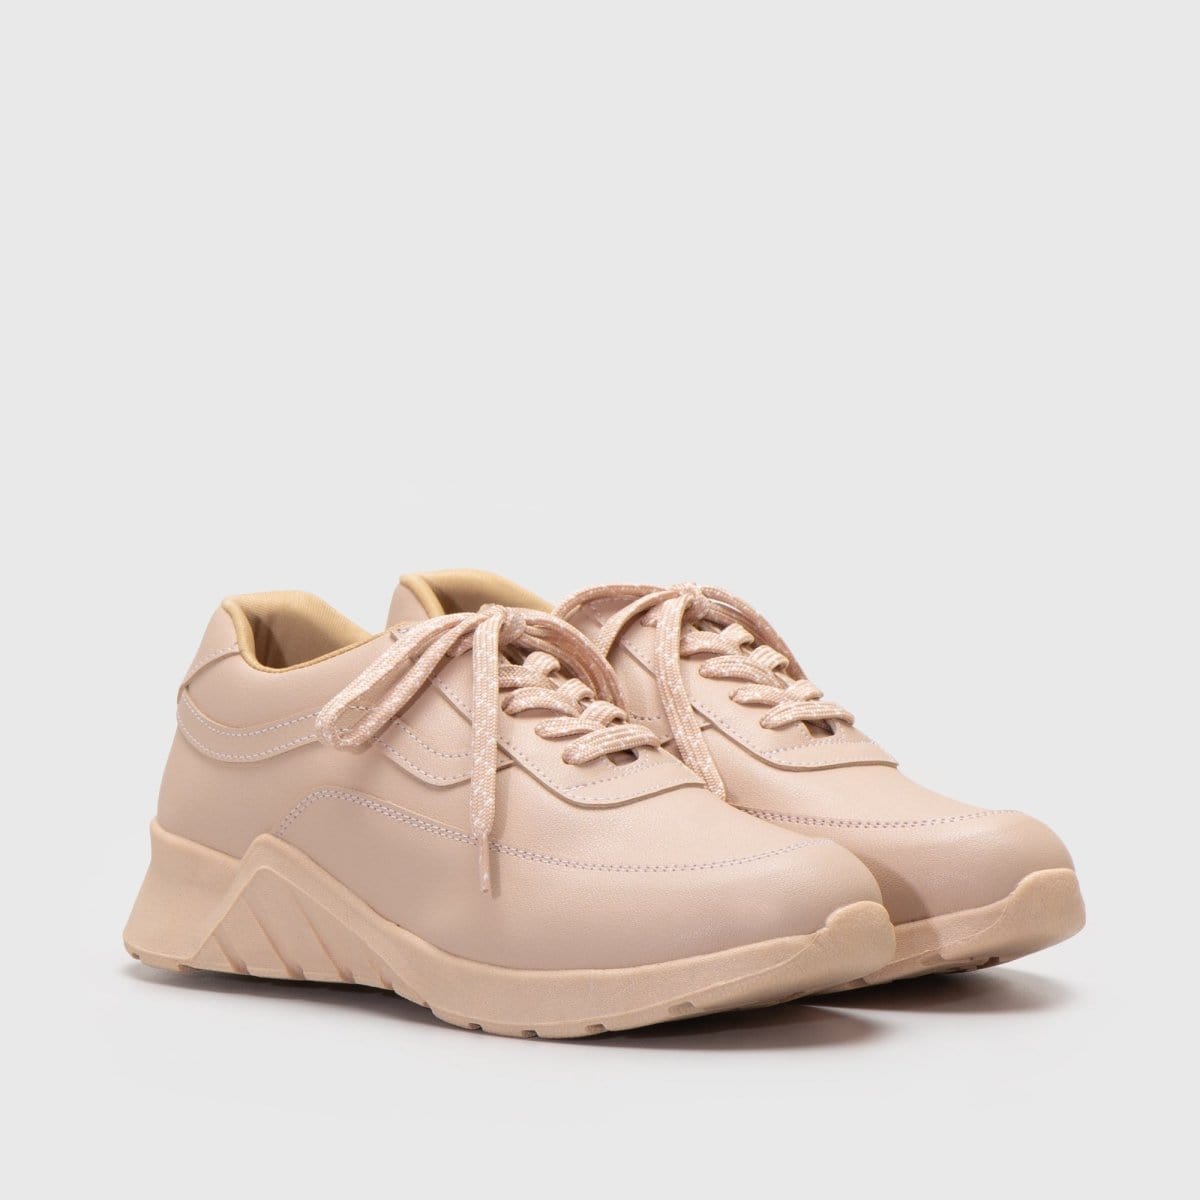 Adorable Projects Official Sneakers 38 / Peach Kikimora Sneakers Peach